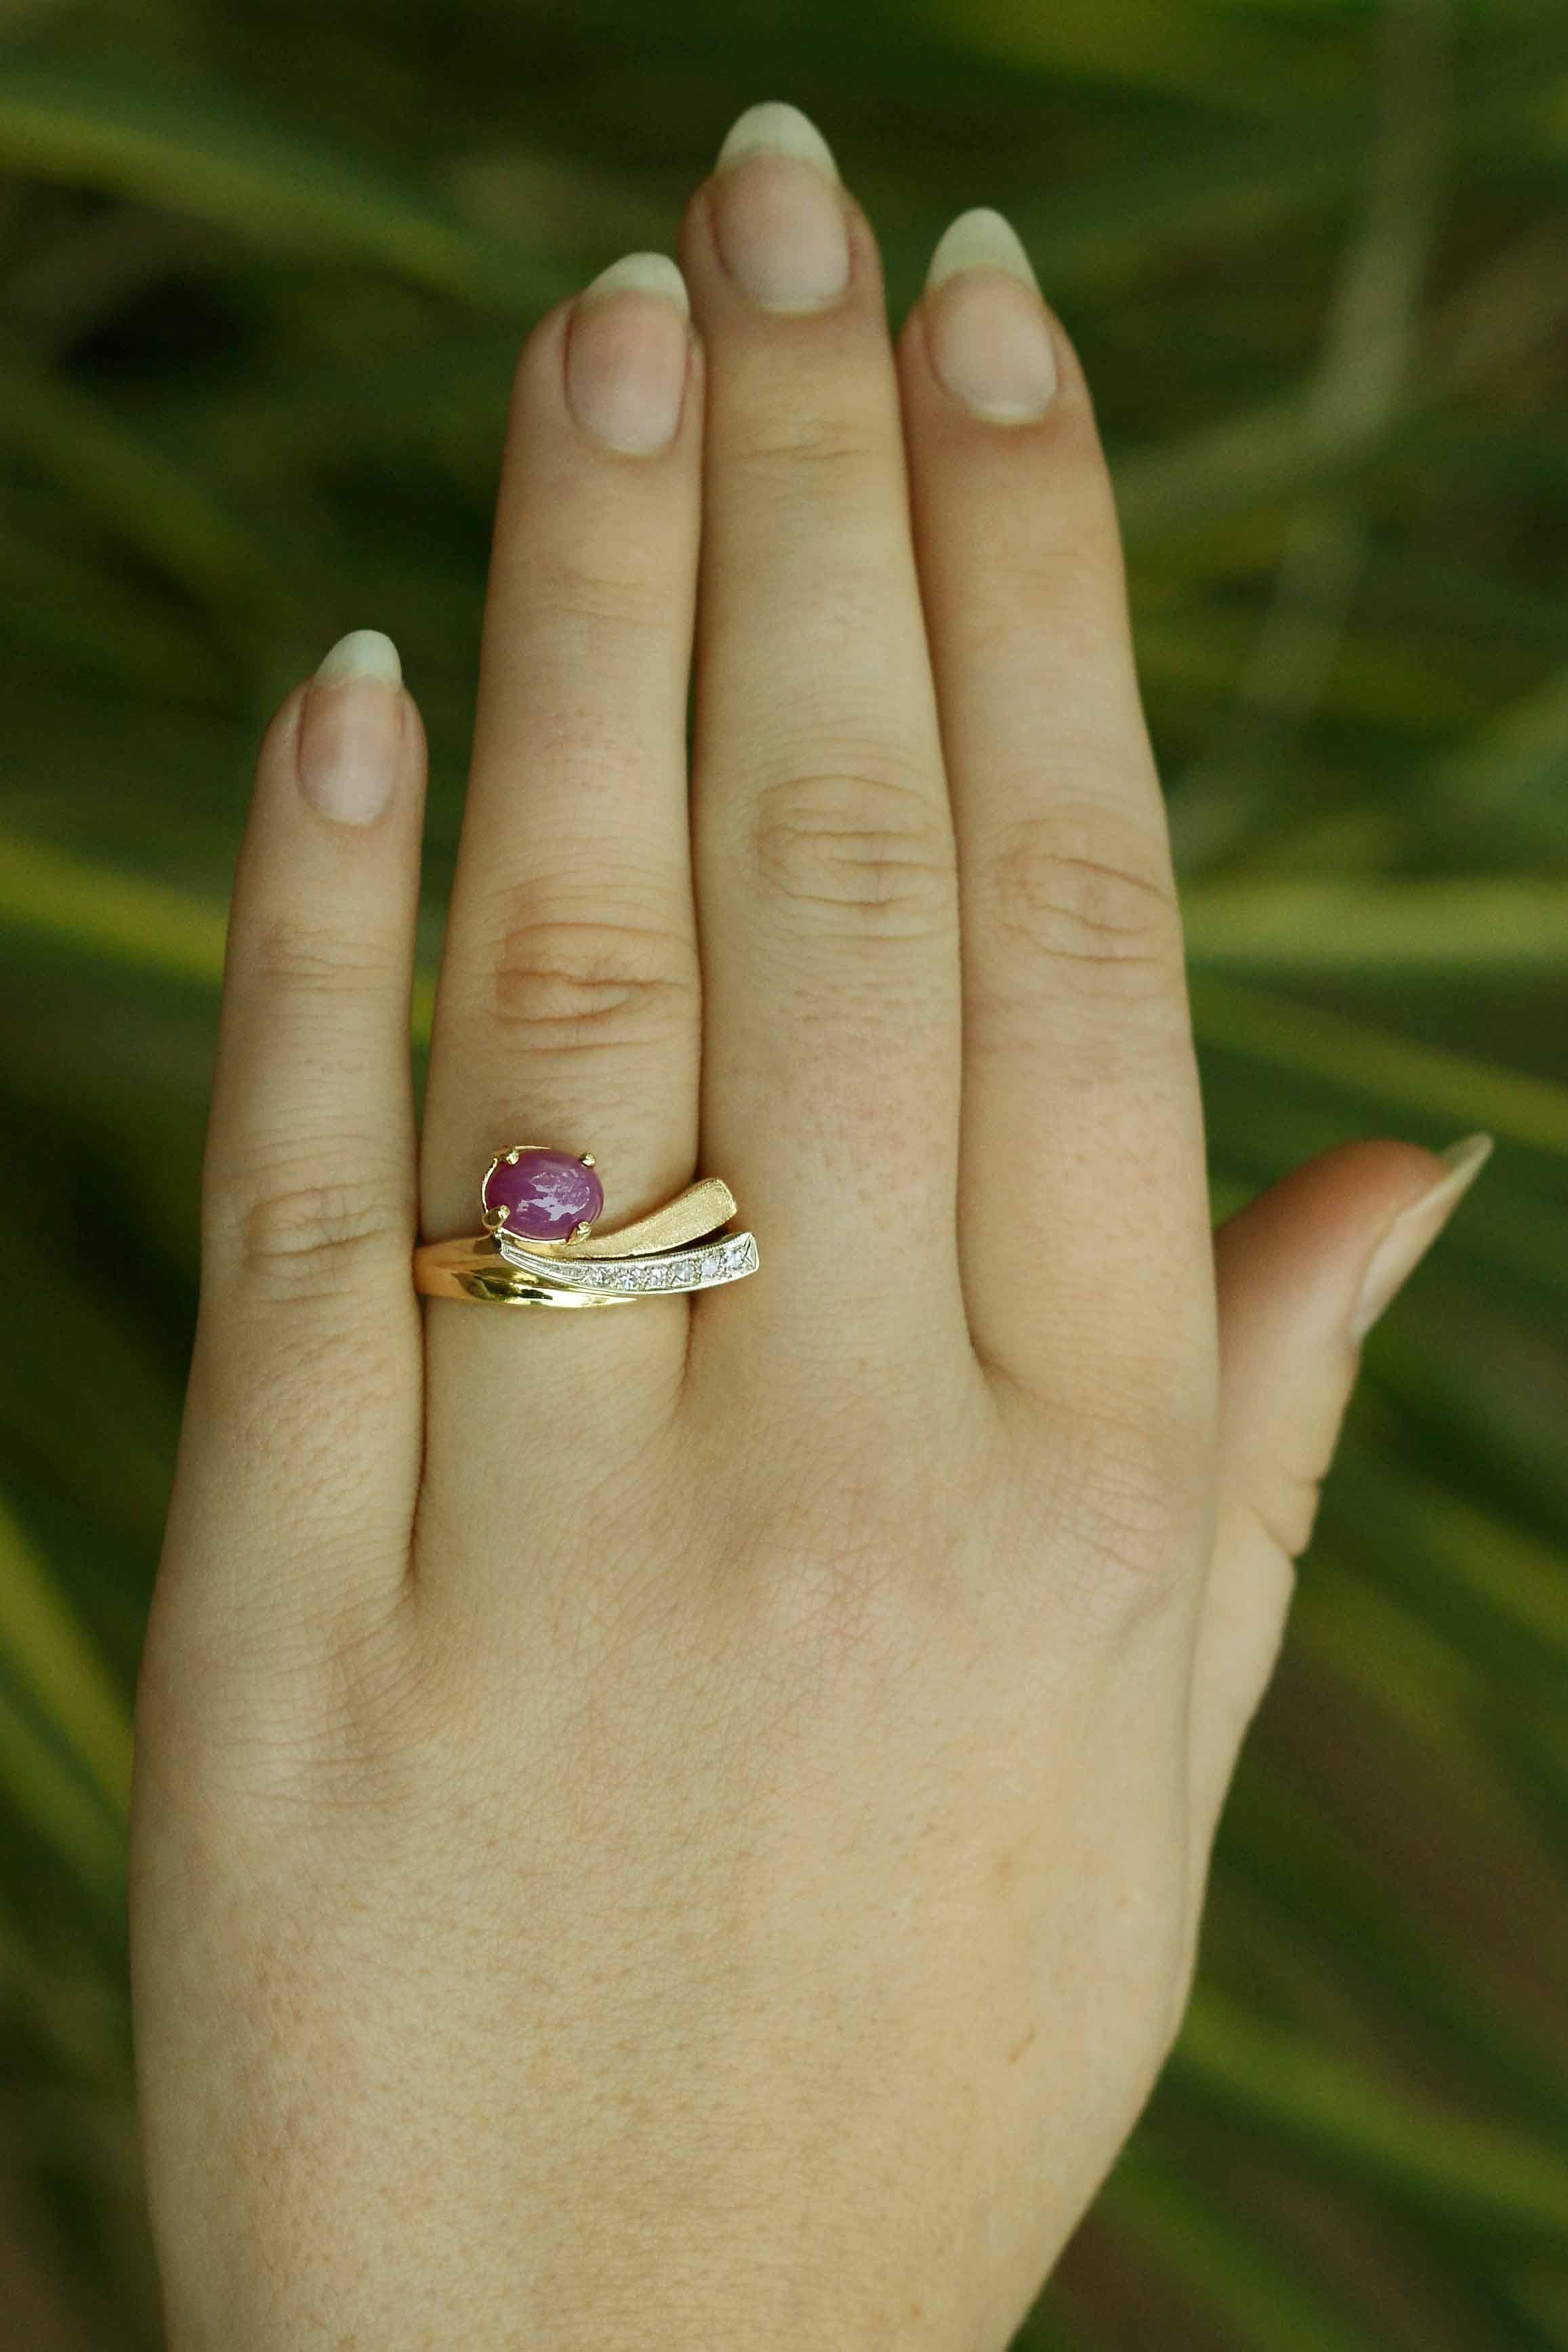 A mid century ring that shows impressionist and creative architecture, depicting a shooting sapphire star. This prominent star's rays emanate from a luscious pink star sapphire and is contemporarily placed alongside the arcing bands, crafted of 14K